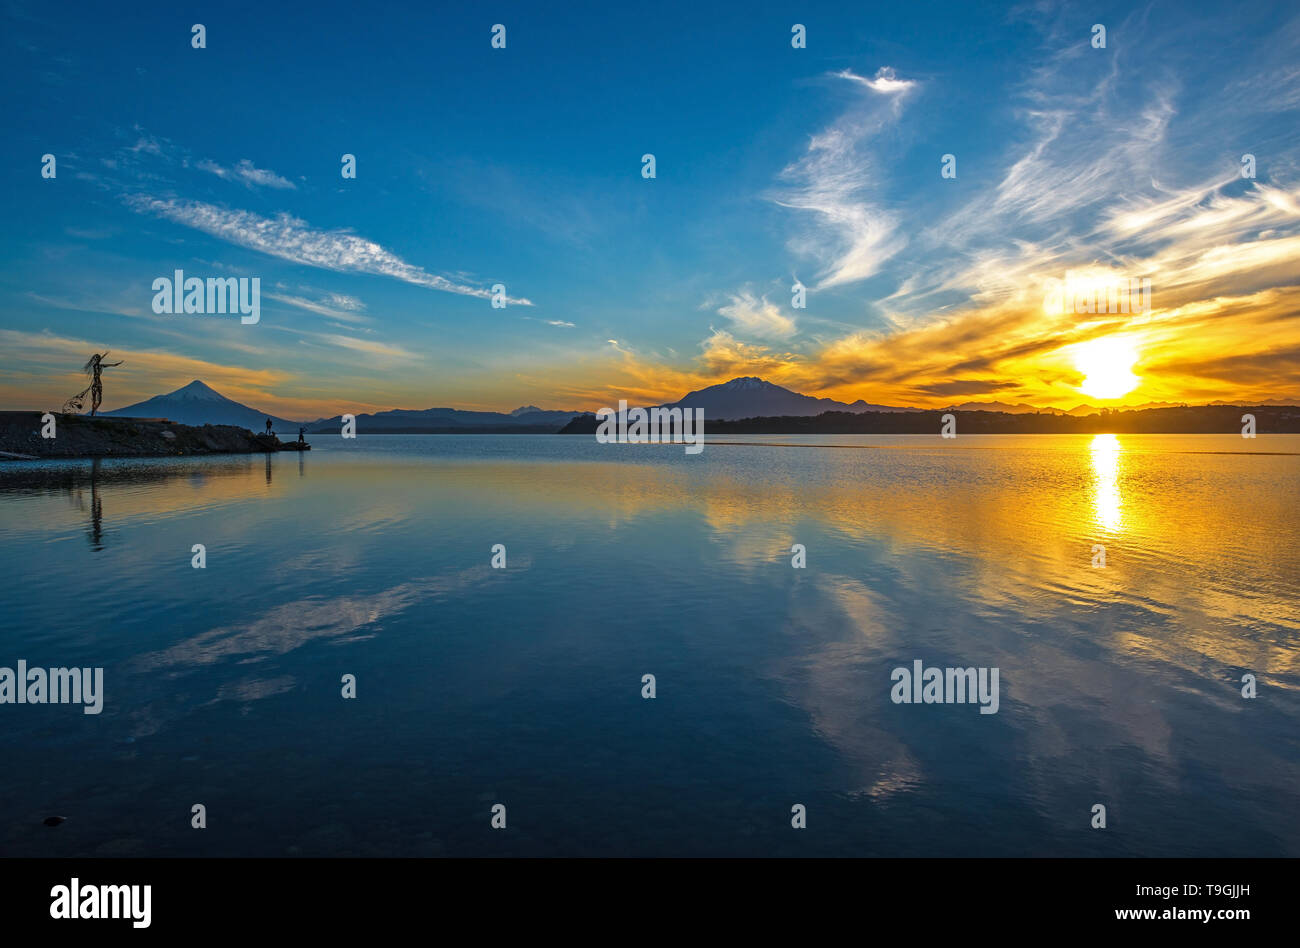 Sunrise in Puerto Varas with a view over the Osorno and Calbuco volcano as well as local fishermen silhouettes, Llanquihue Lake, Chile. Stock Photo